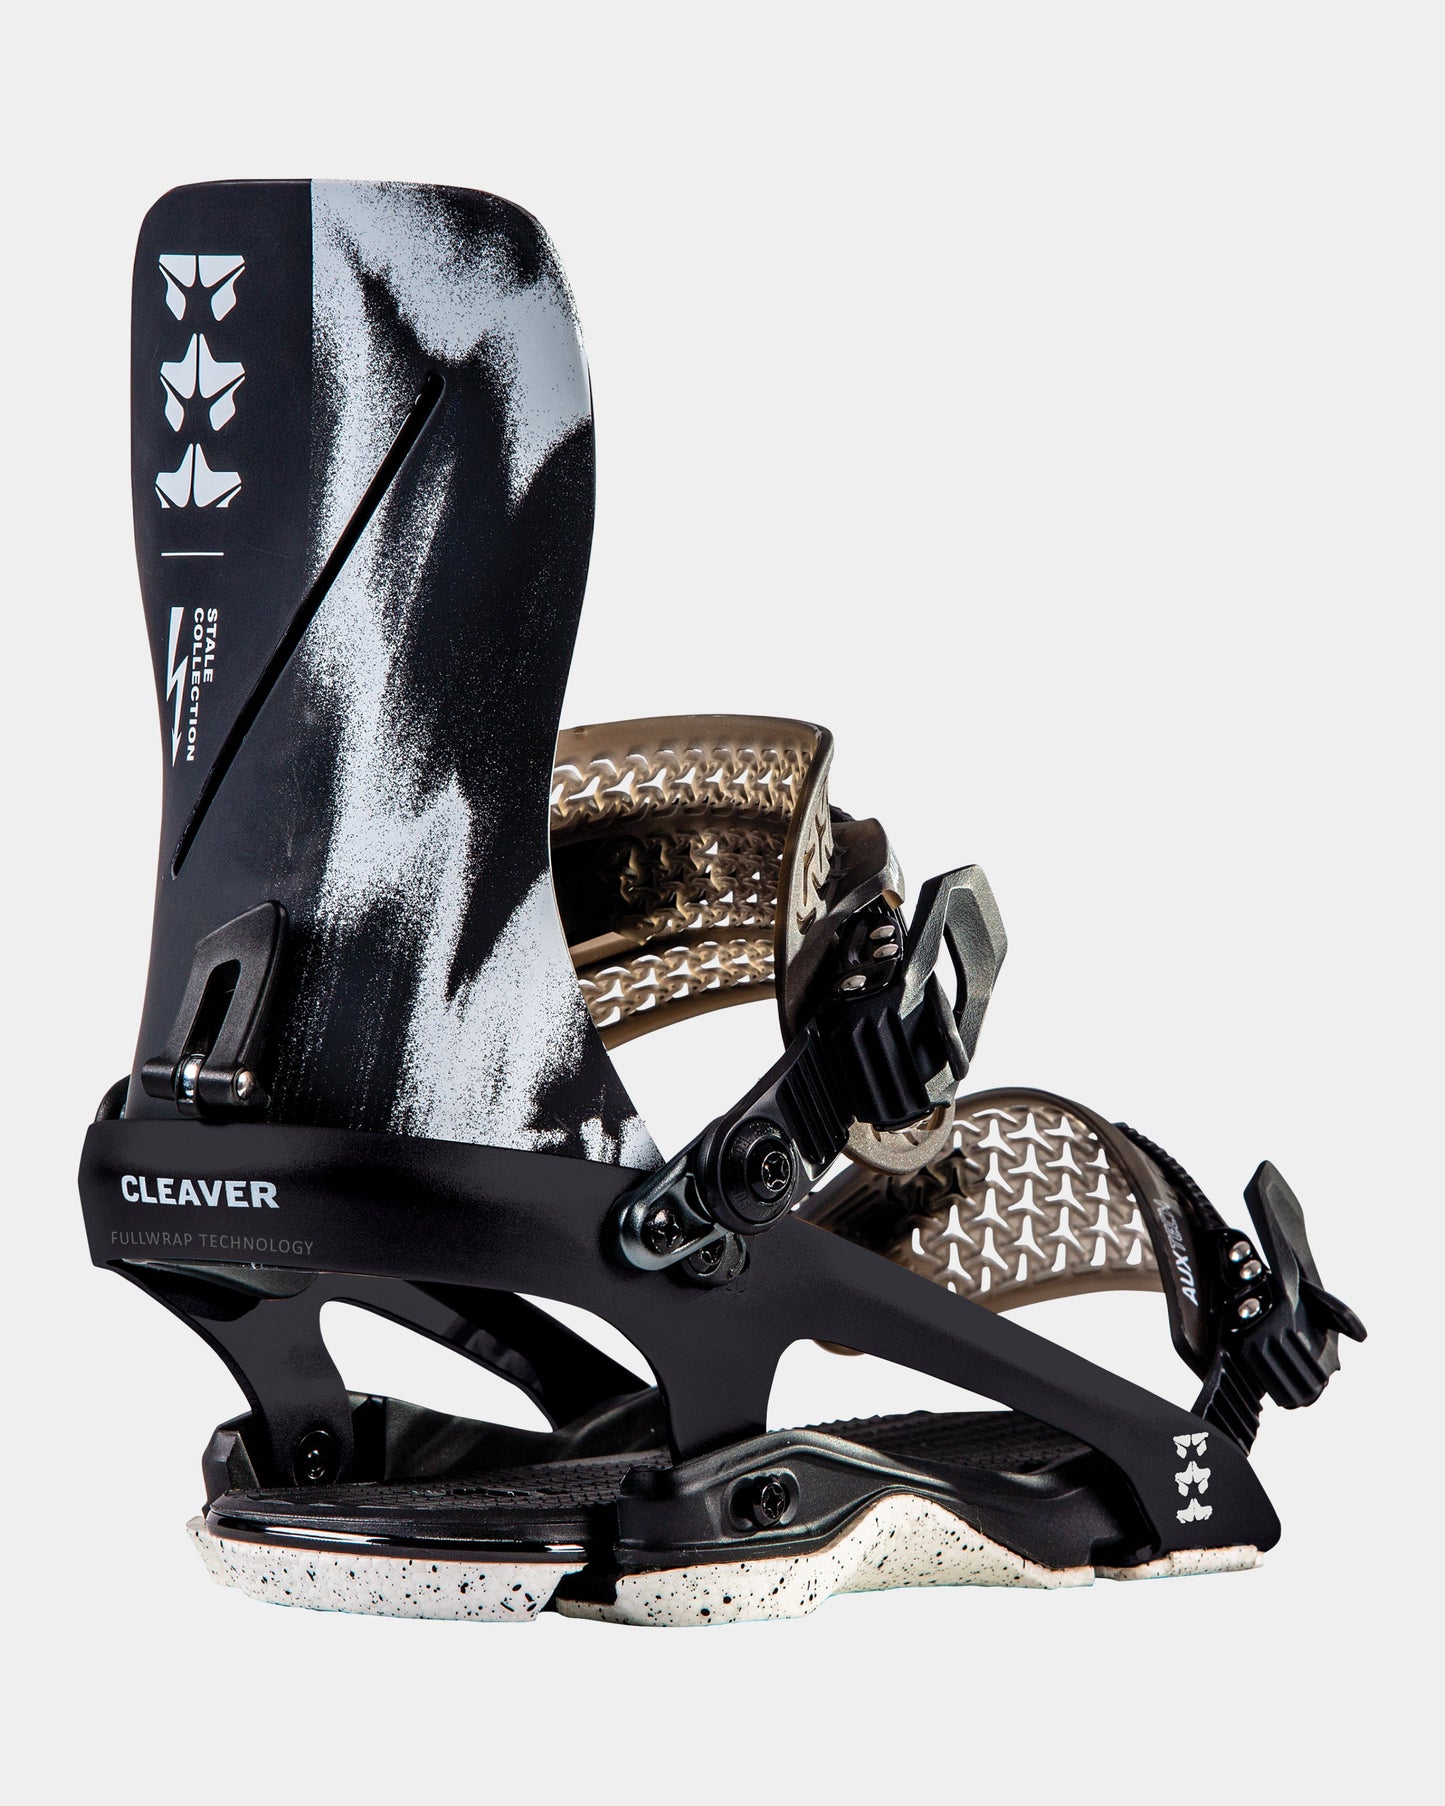 rome cleaver bindings 2023 rome bindings product photo from back cover shot in studio color stale